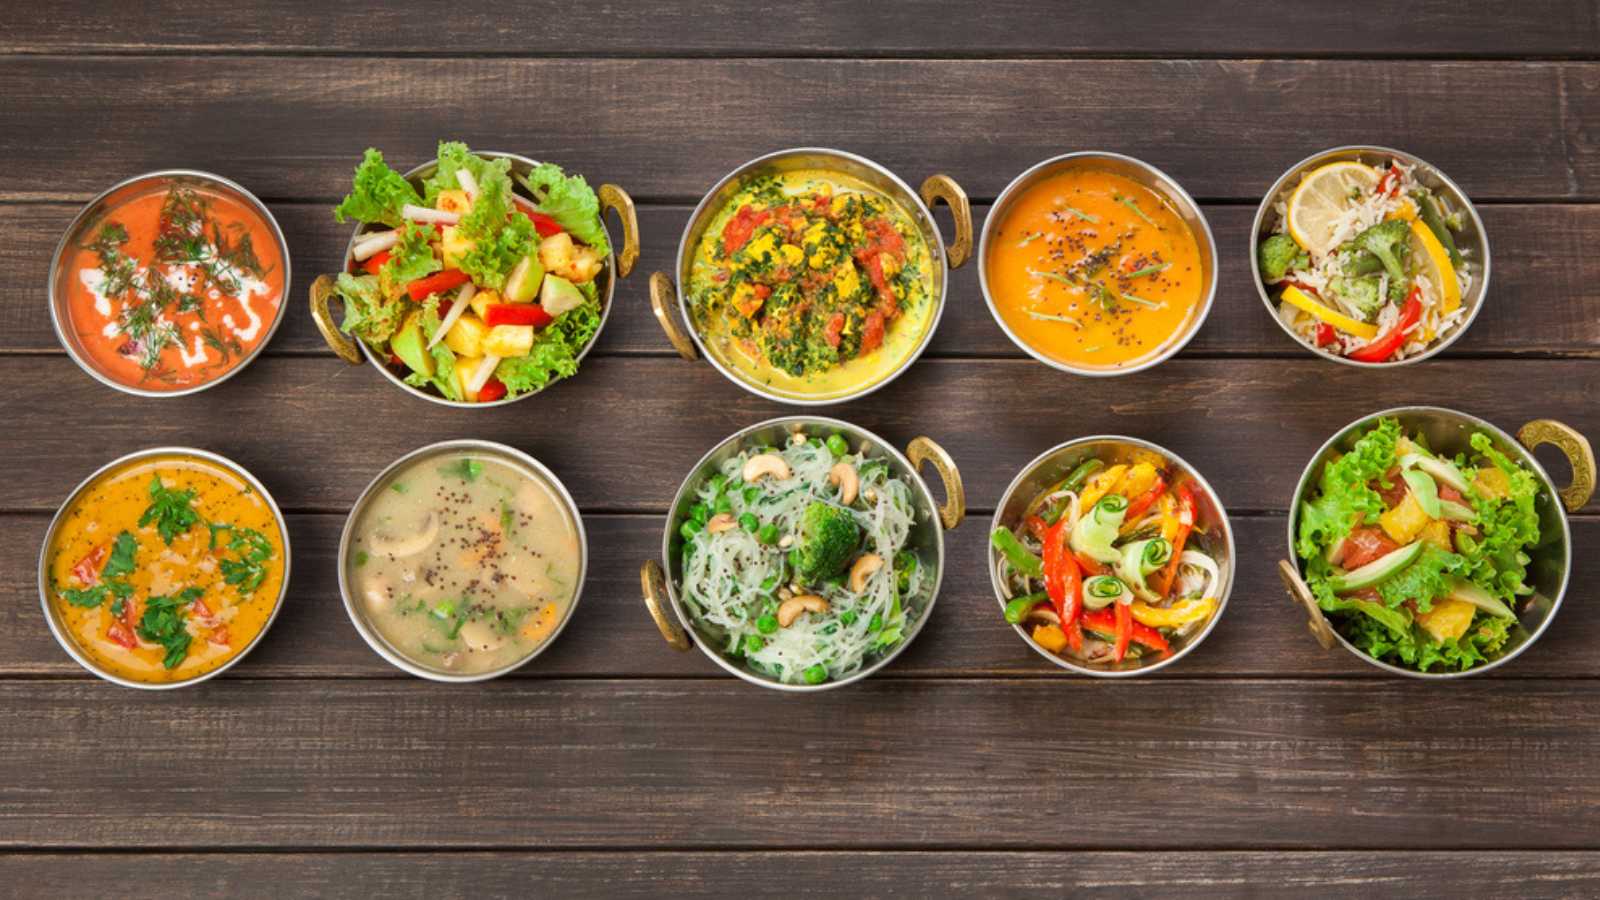 Vegan or vegetarian restaurant dishes top view, hot spicy indian soups, rice and salads in copper bowls. Traditional indian cuisine meal assortment on wood background. Healthy eastern local food